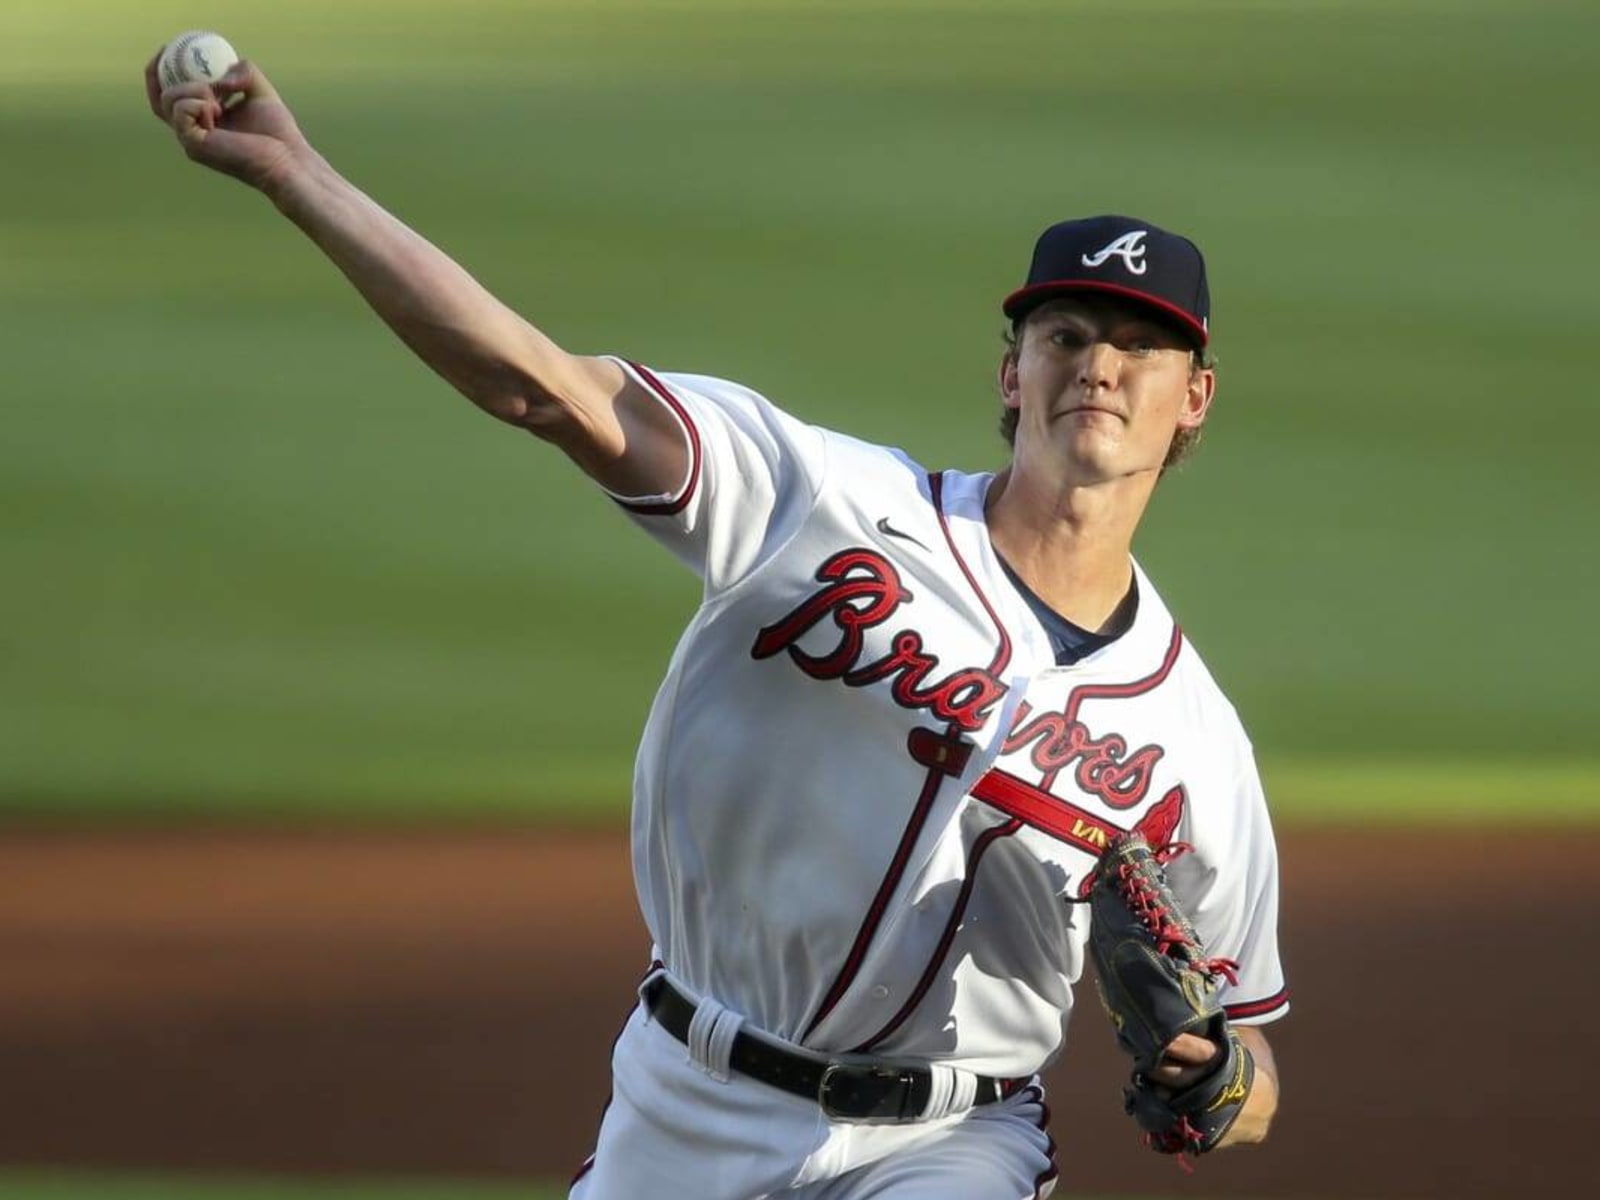 Grant McAuley on X: Inside the details of the #Braves City